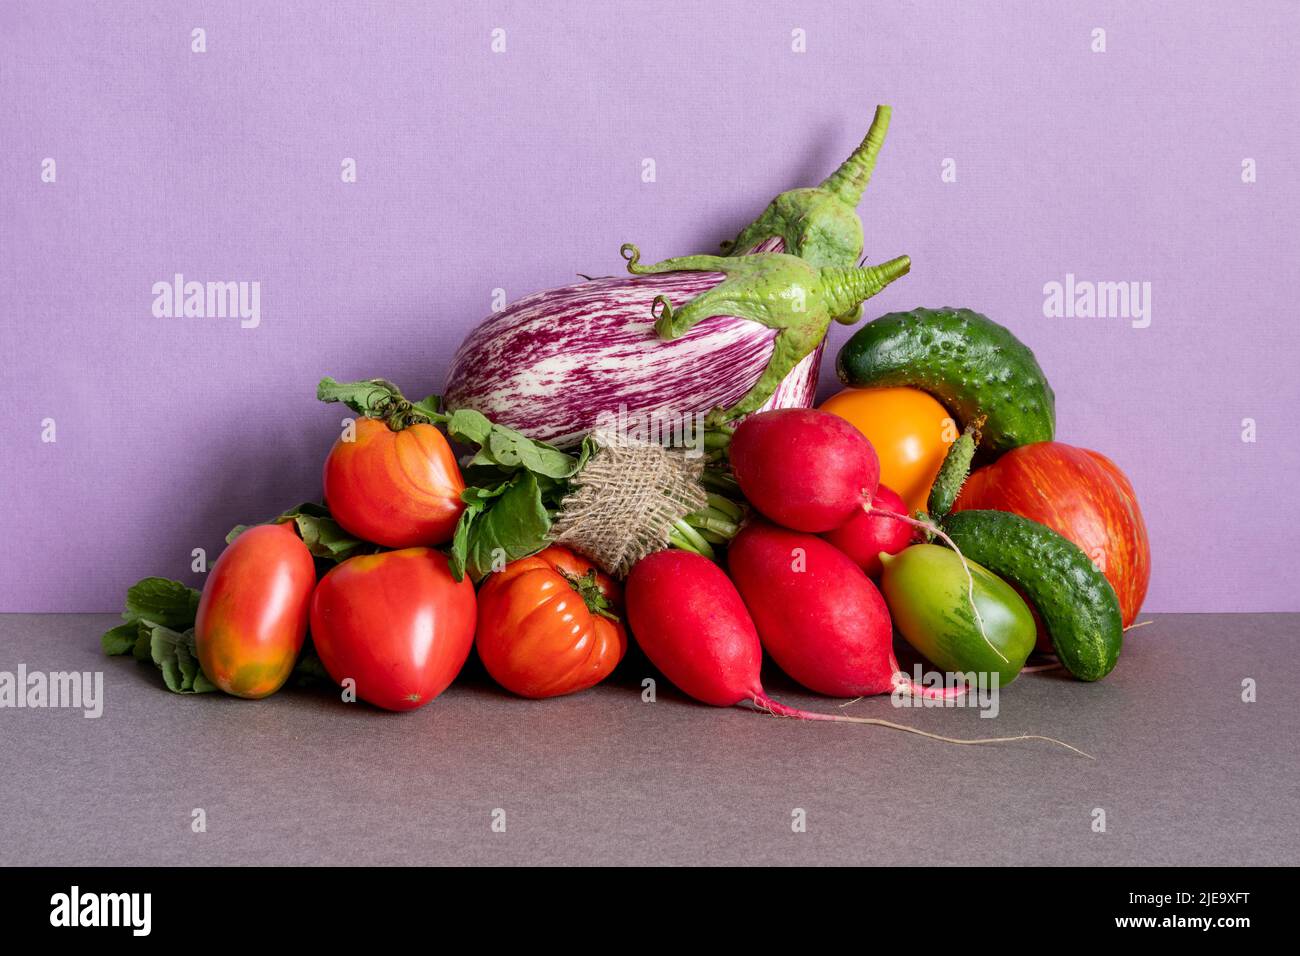 Healthy vegetarian food organic vegetables still life concept. Farm aubergine eggplants, tomatoes of various grade, bell peppers, carrot and cucumber Stock Photo